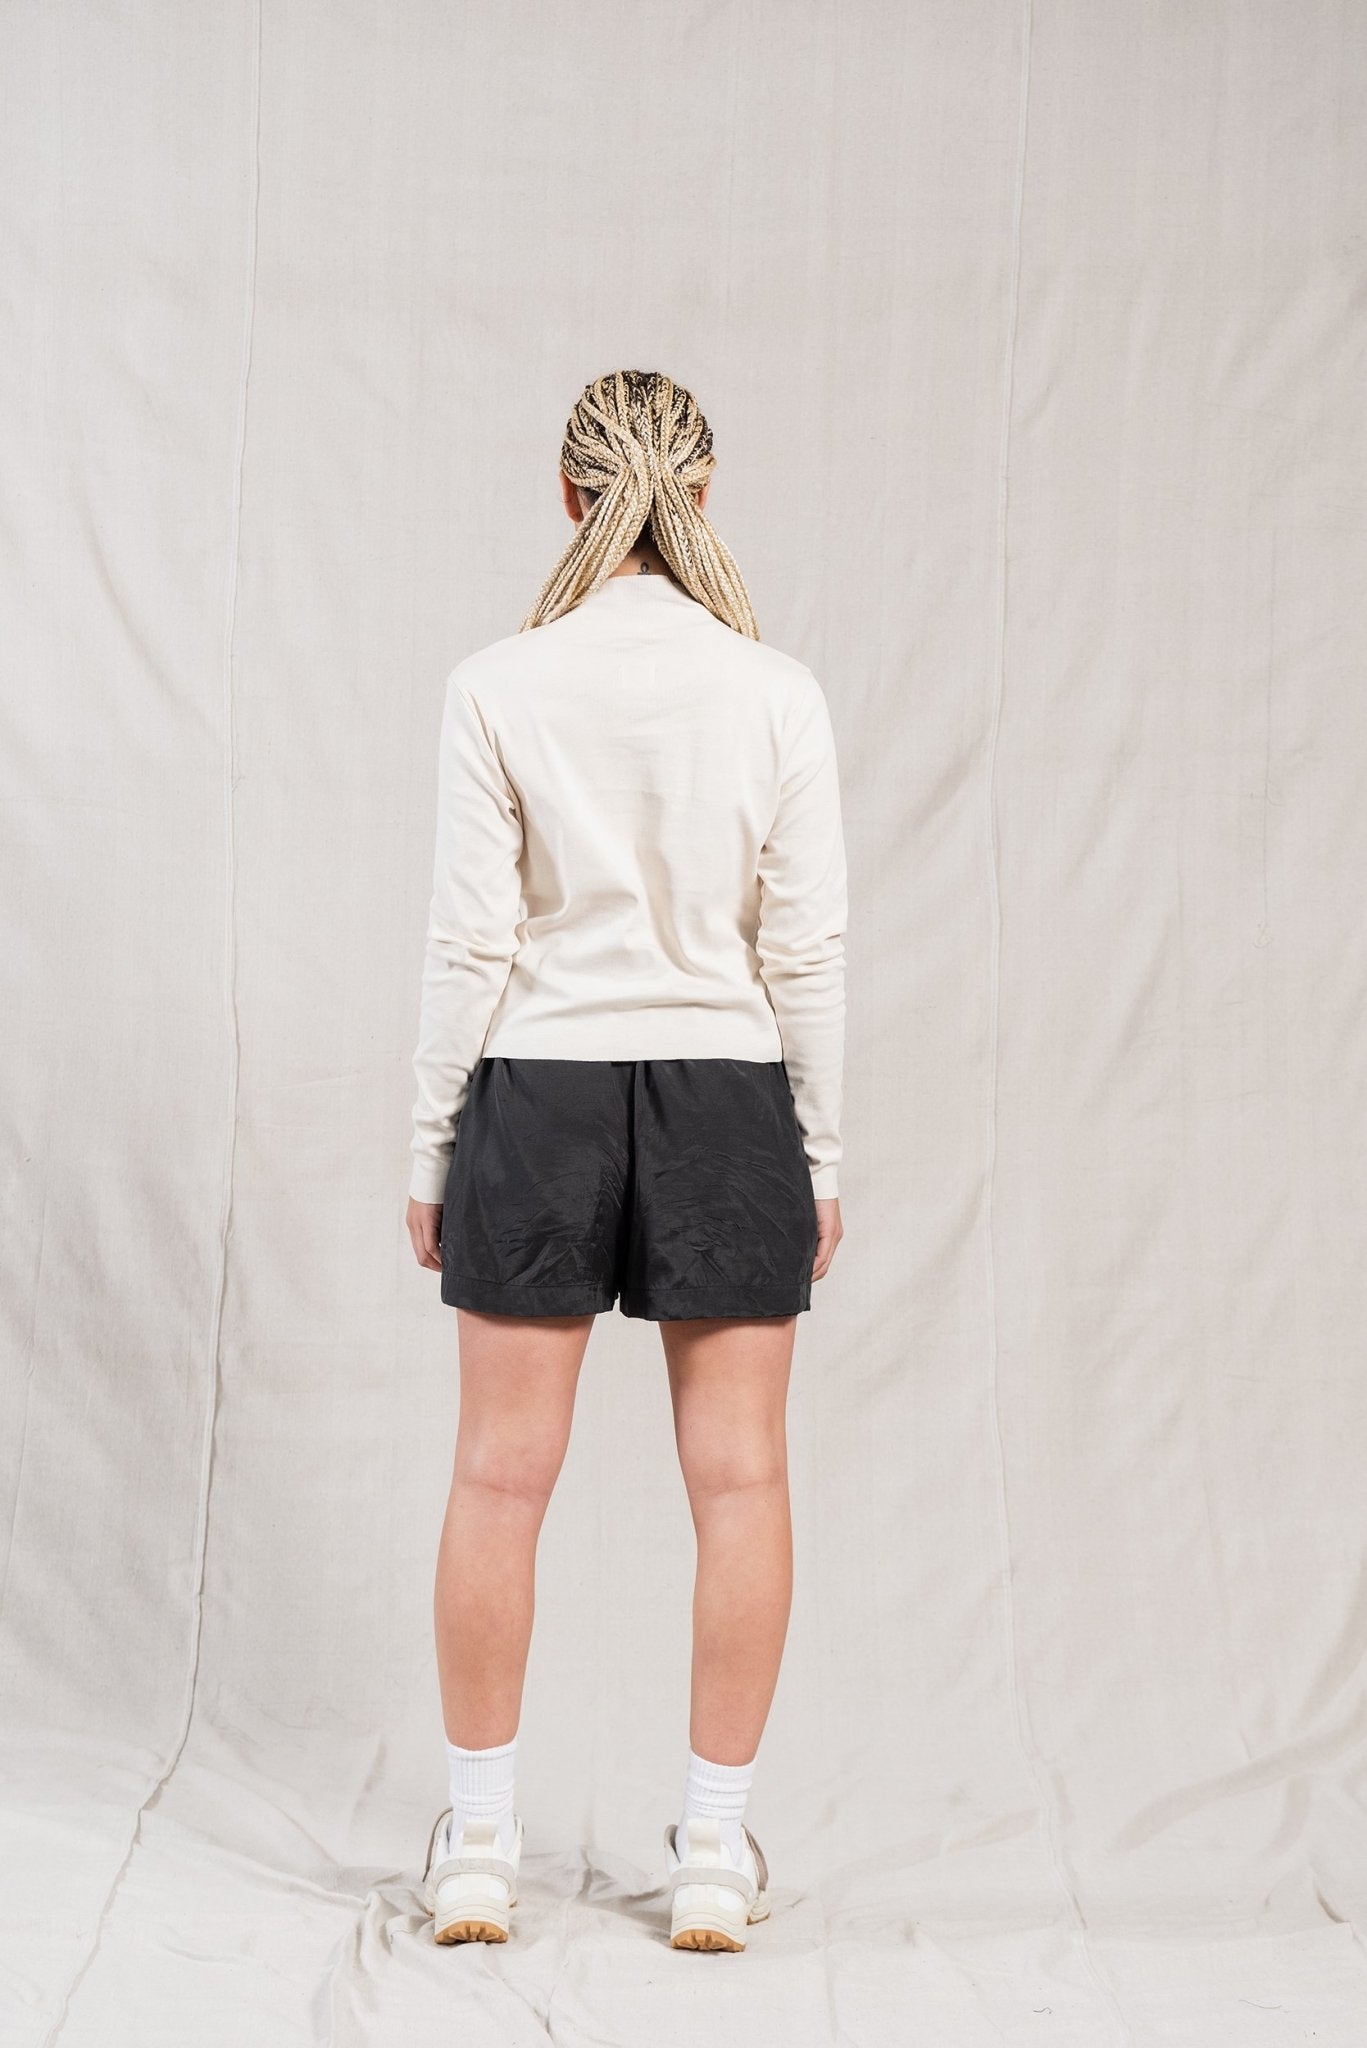 A.BCH A.14 Undyed Long Sleeve Skivvy in Organic Cotton Rib